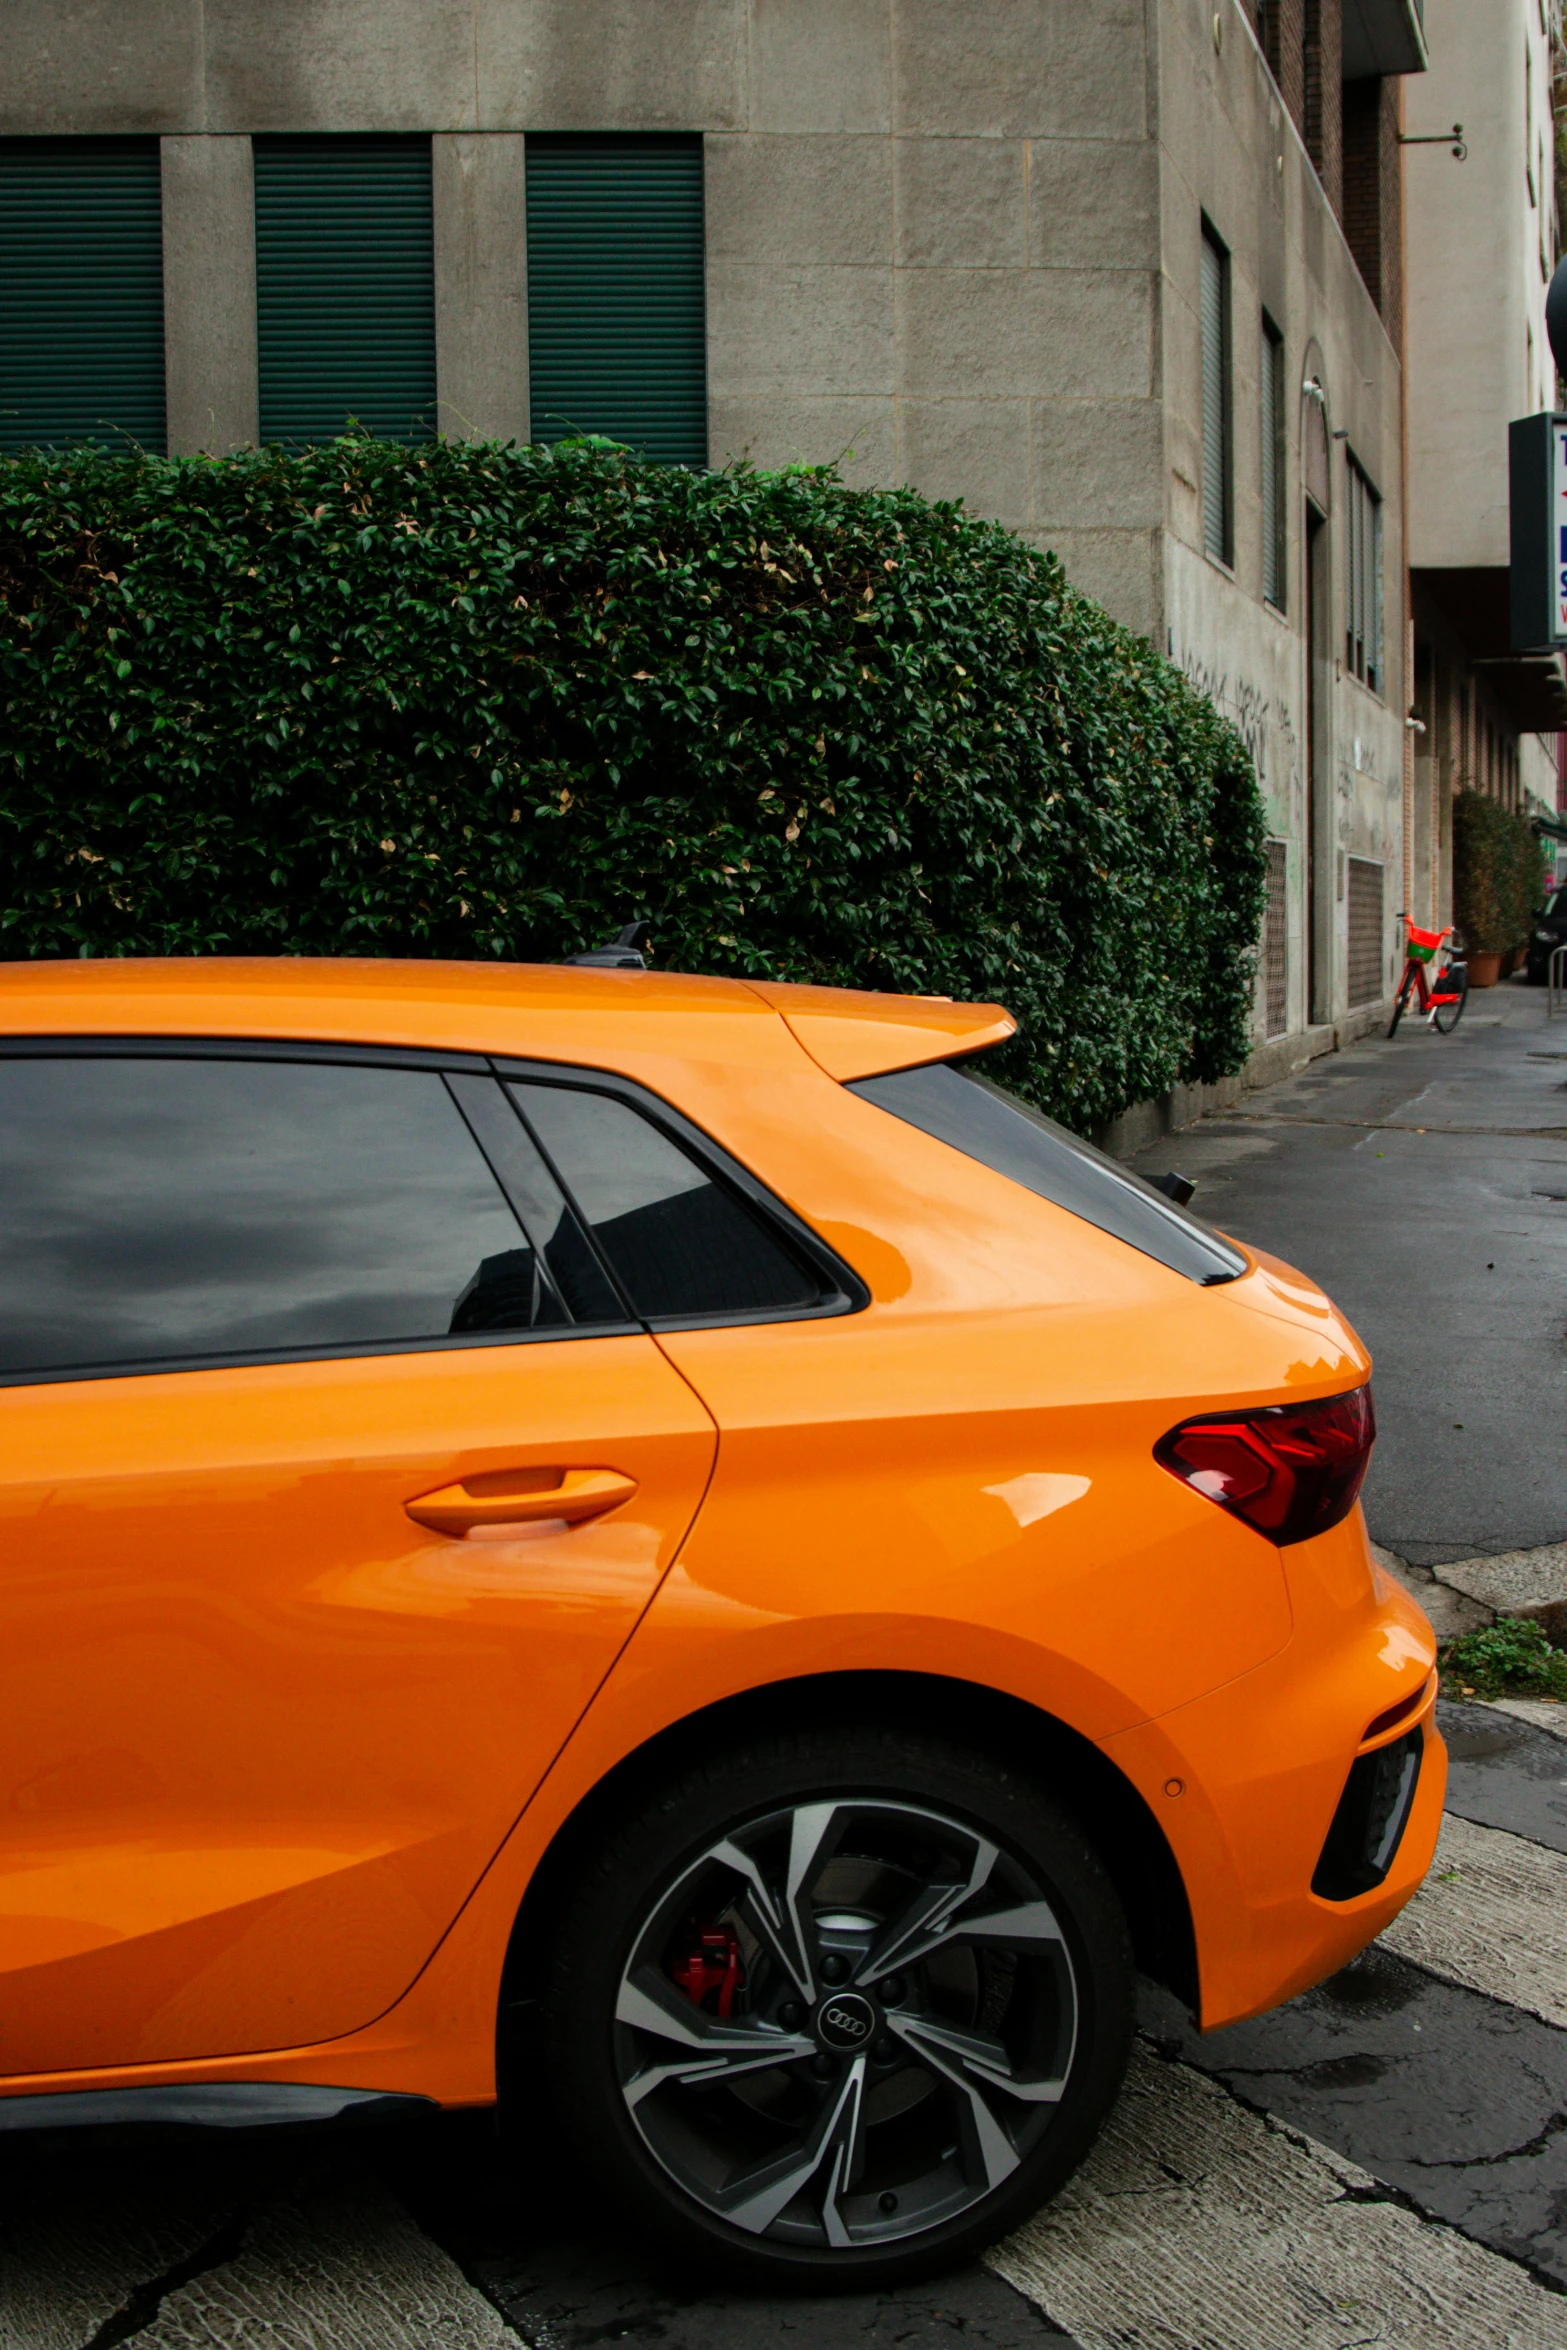 the orange car is parked on the sidewalk